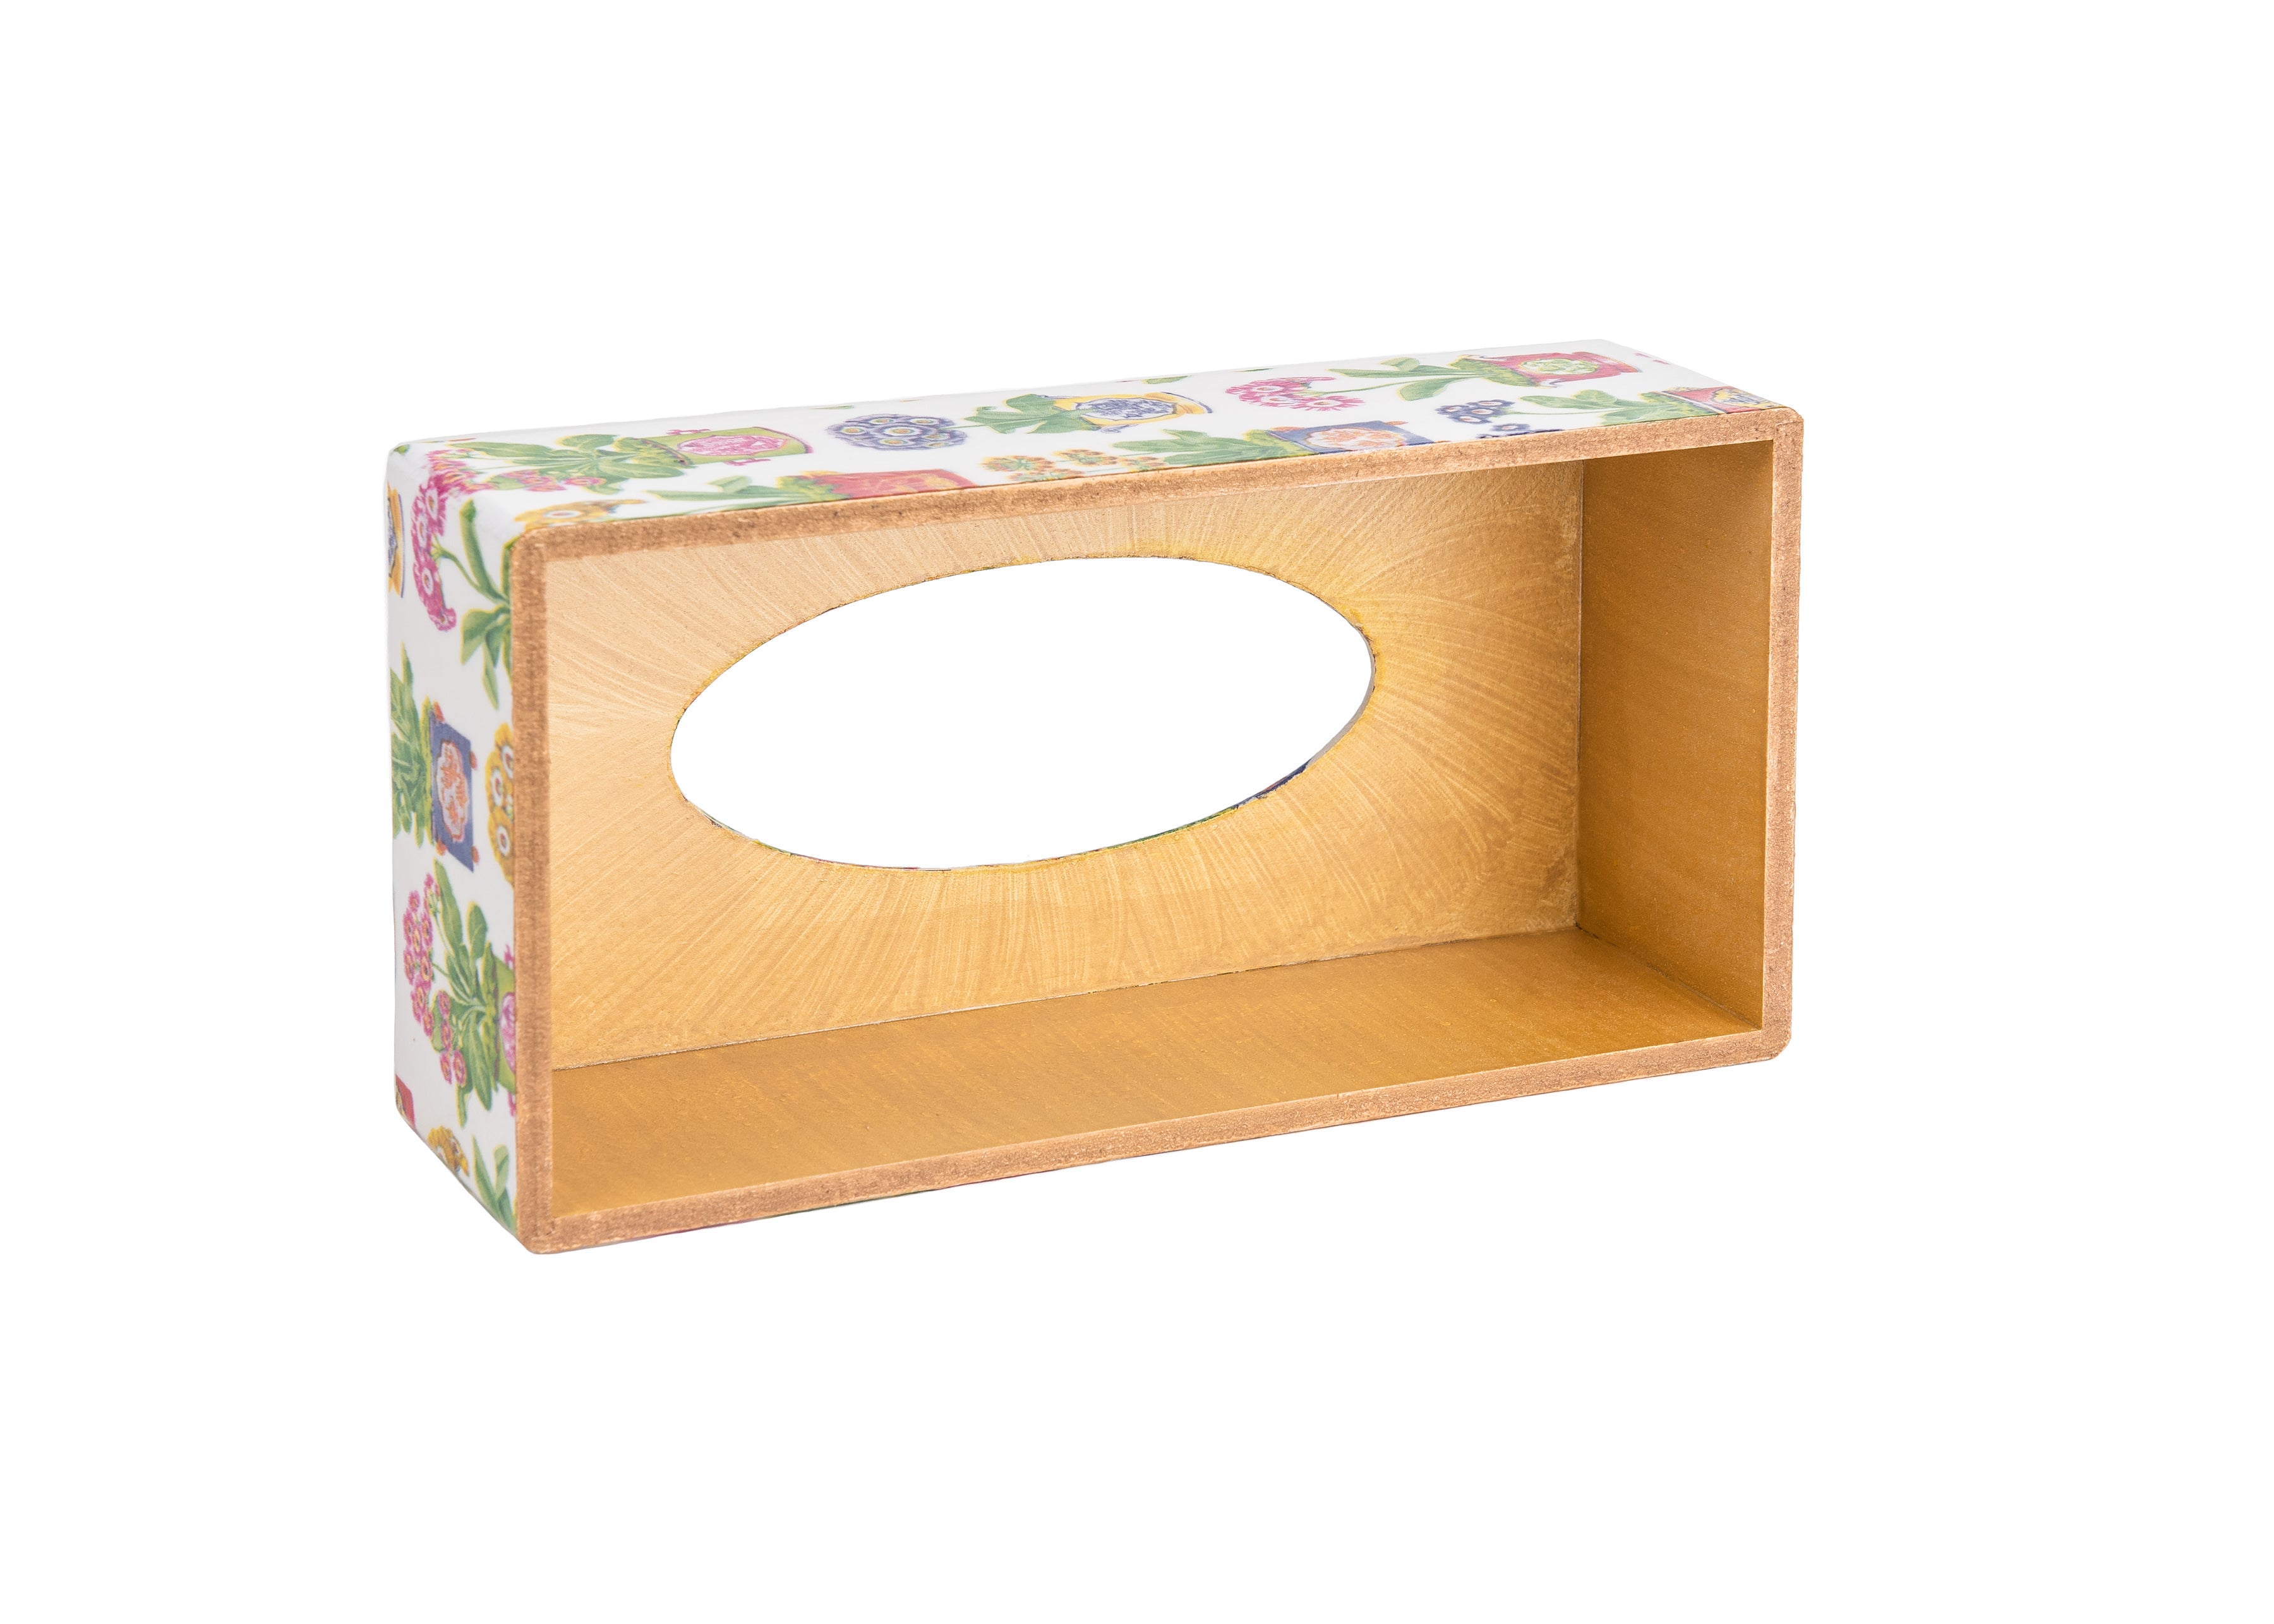 Potted Plants Rectangular Tissue Box Cover